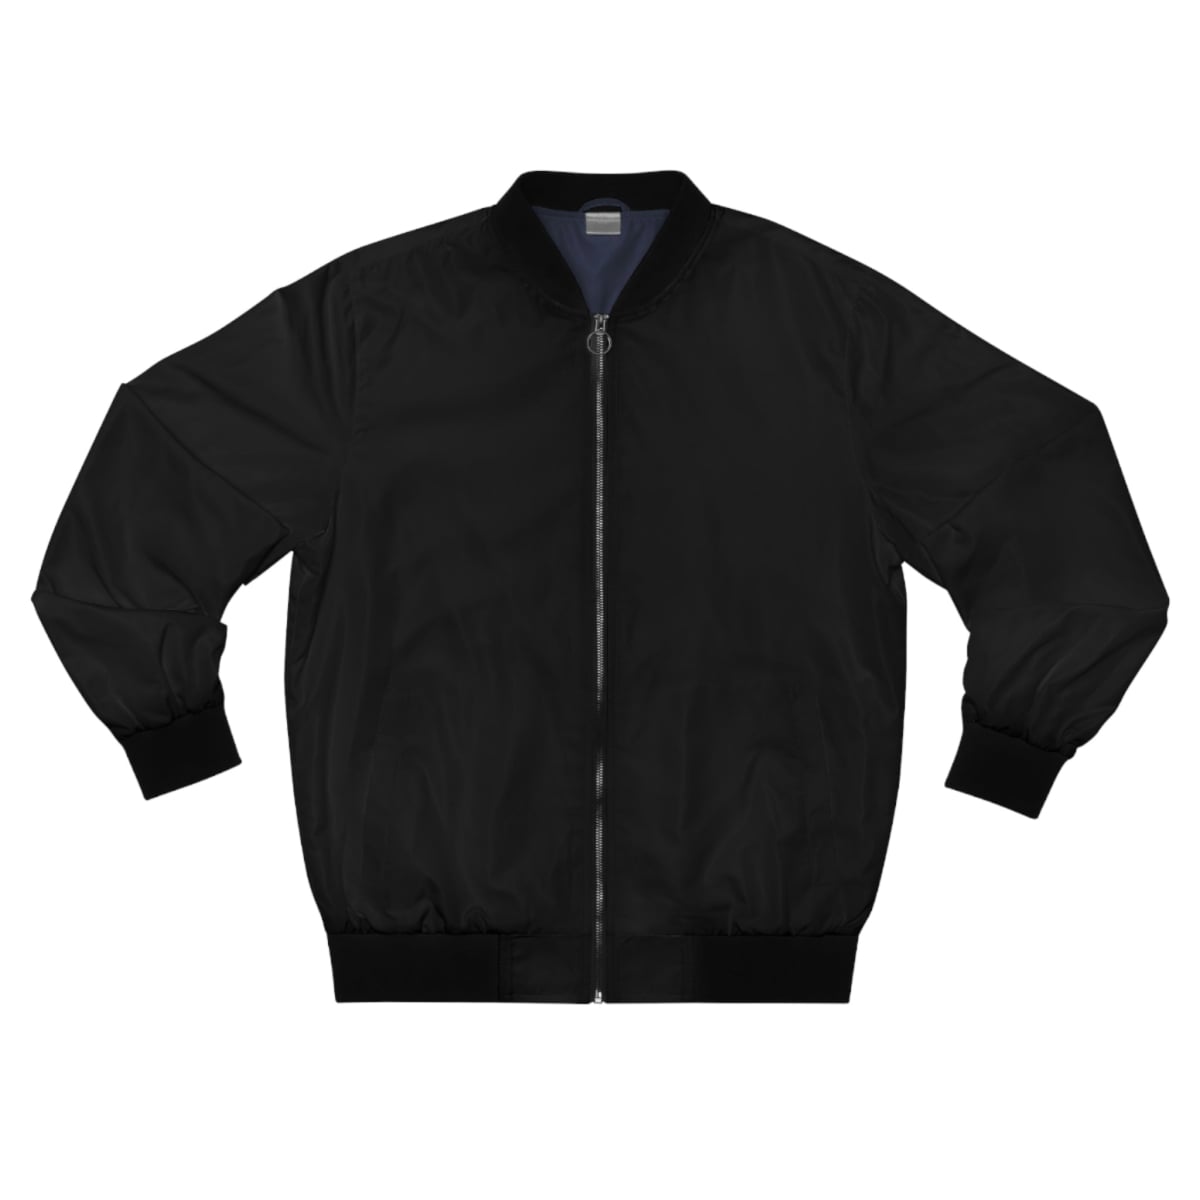 Model of the Psyche Carl Jung Bomber Jacket